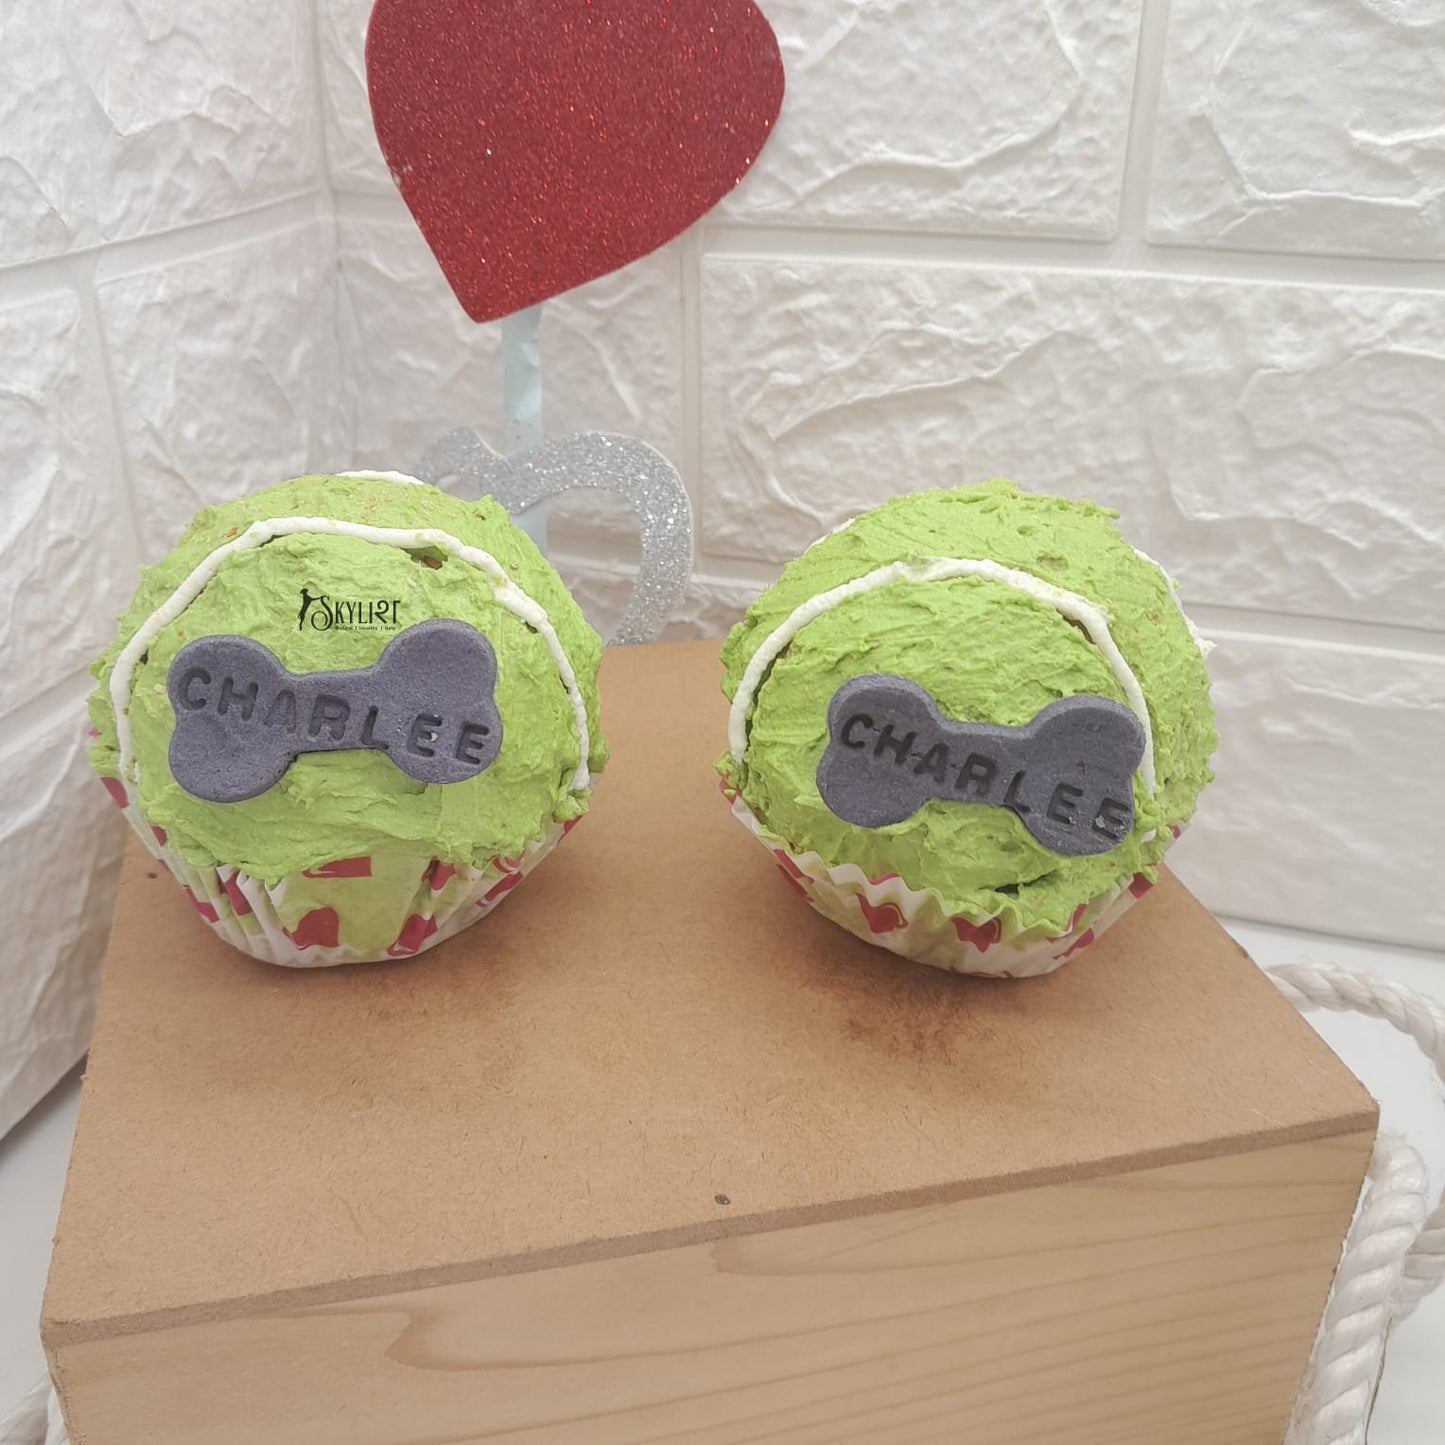 Tennis Ball cakes for dogs